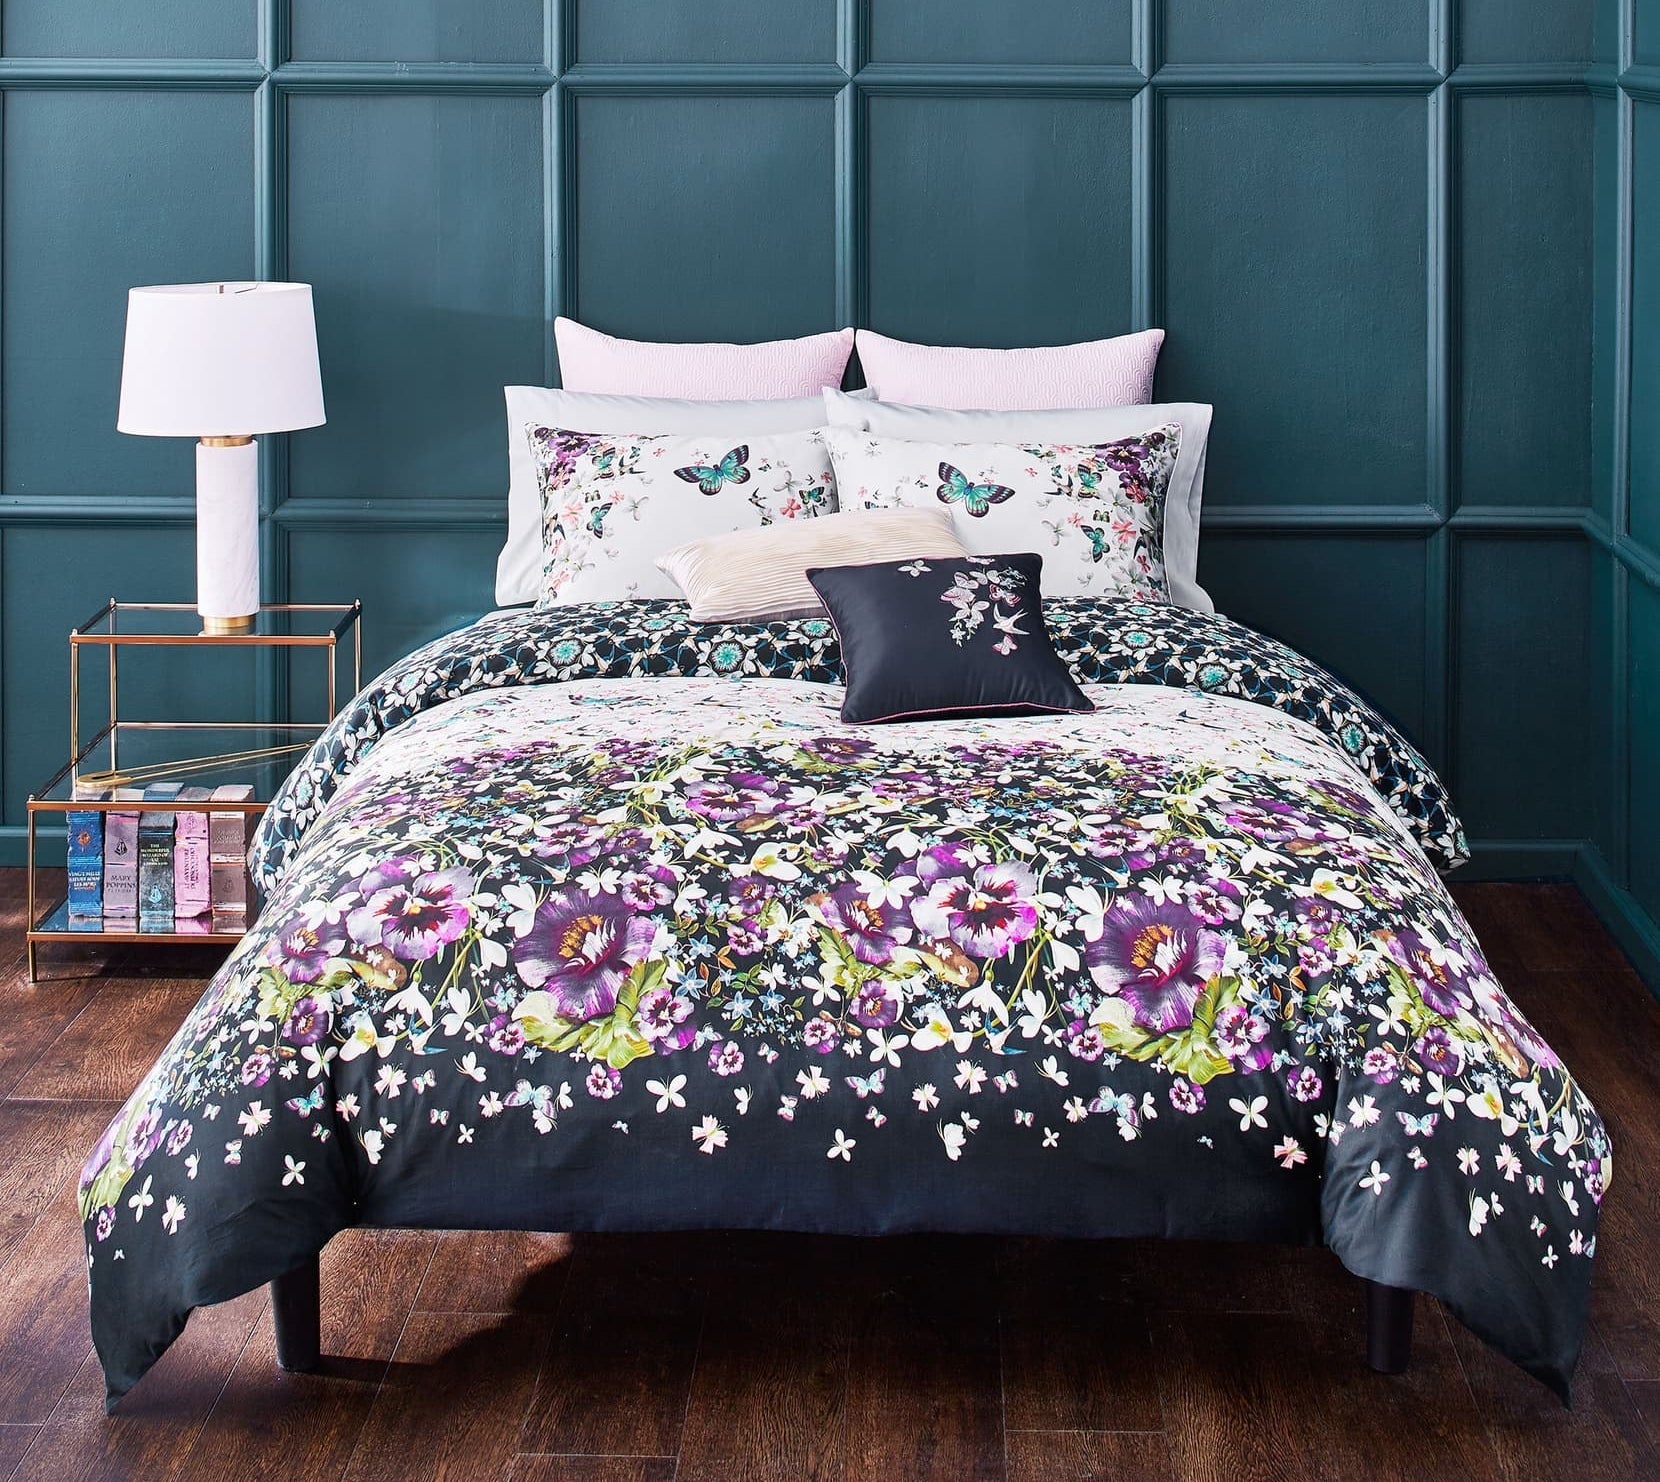 The comforter set in a pansy and butterfly pattern